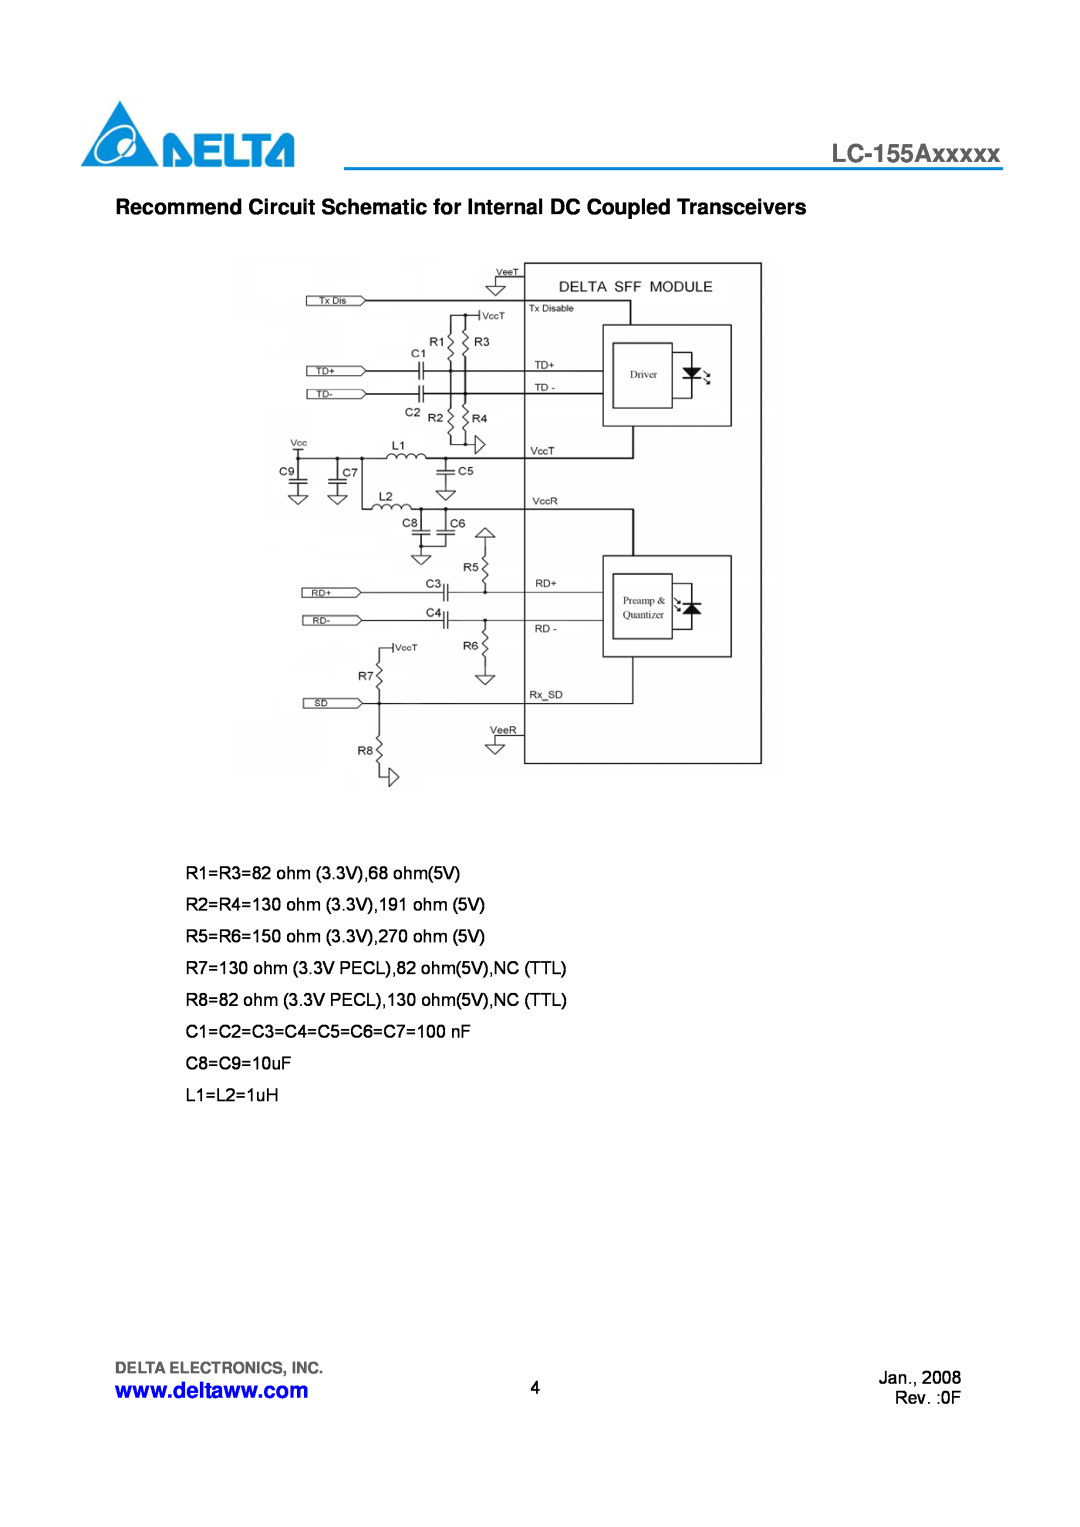 Delta Electronics LC-155Axxxxx manual Recommend Circuit Schematic for Internal DC Coupled Transceivers, L1=L2=1uH 